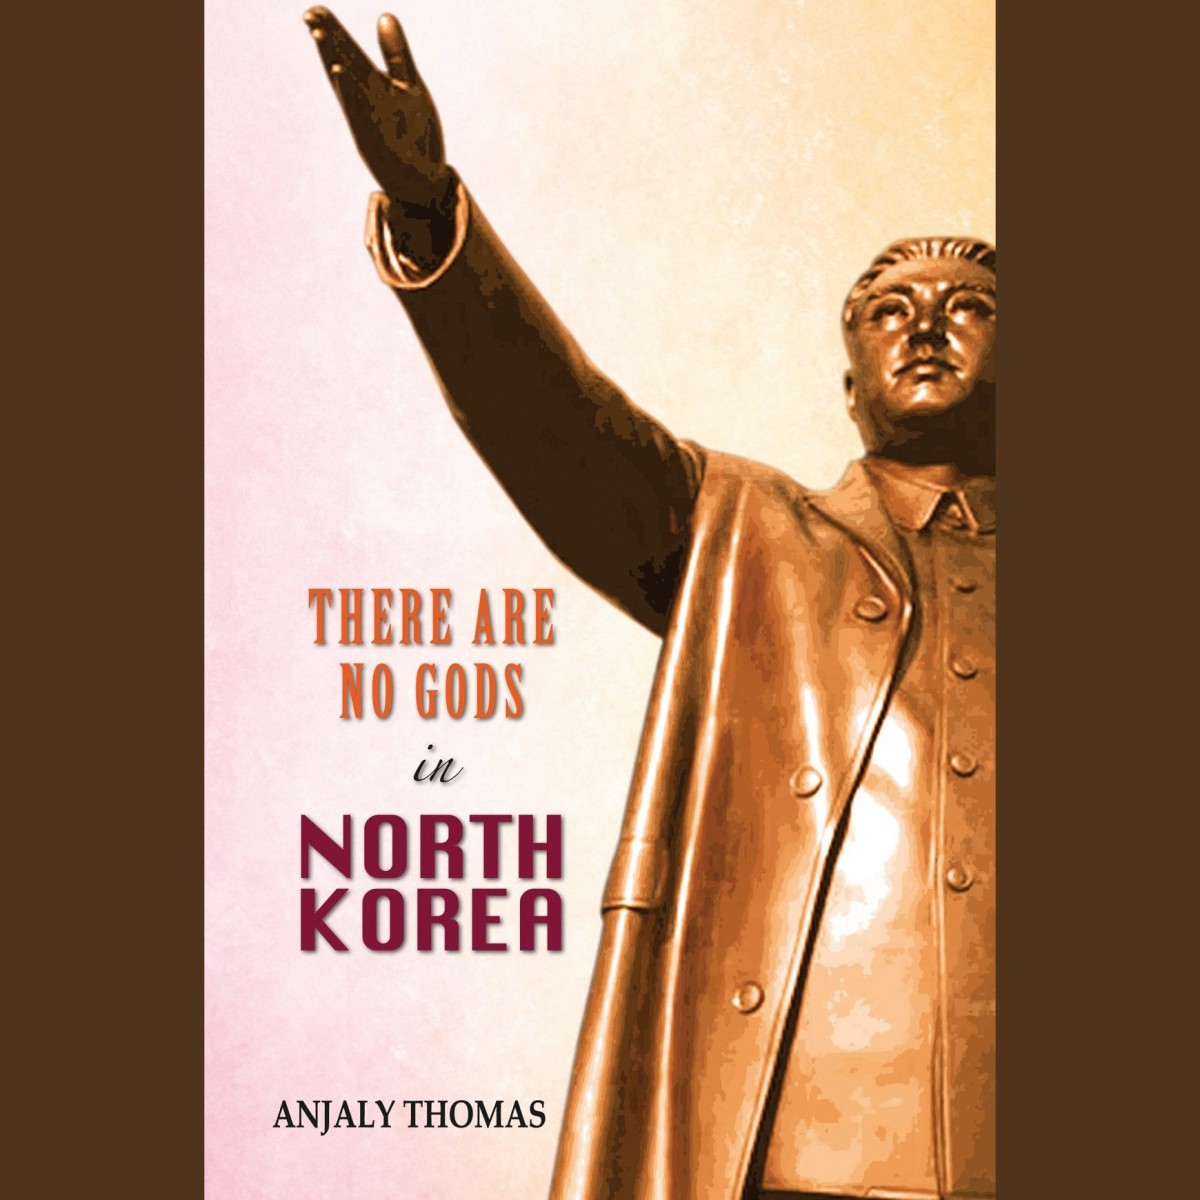 Anjaly Thomas: There Are No Gods in North Korea